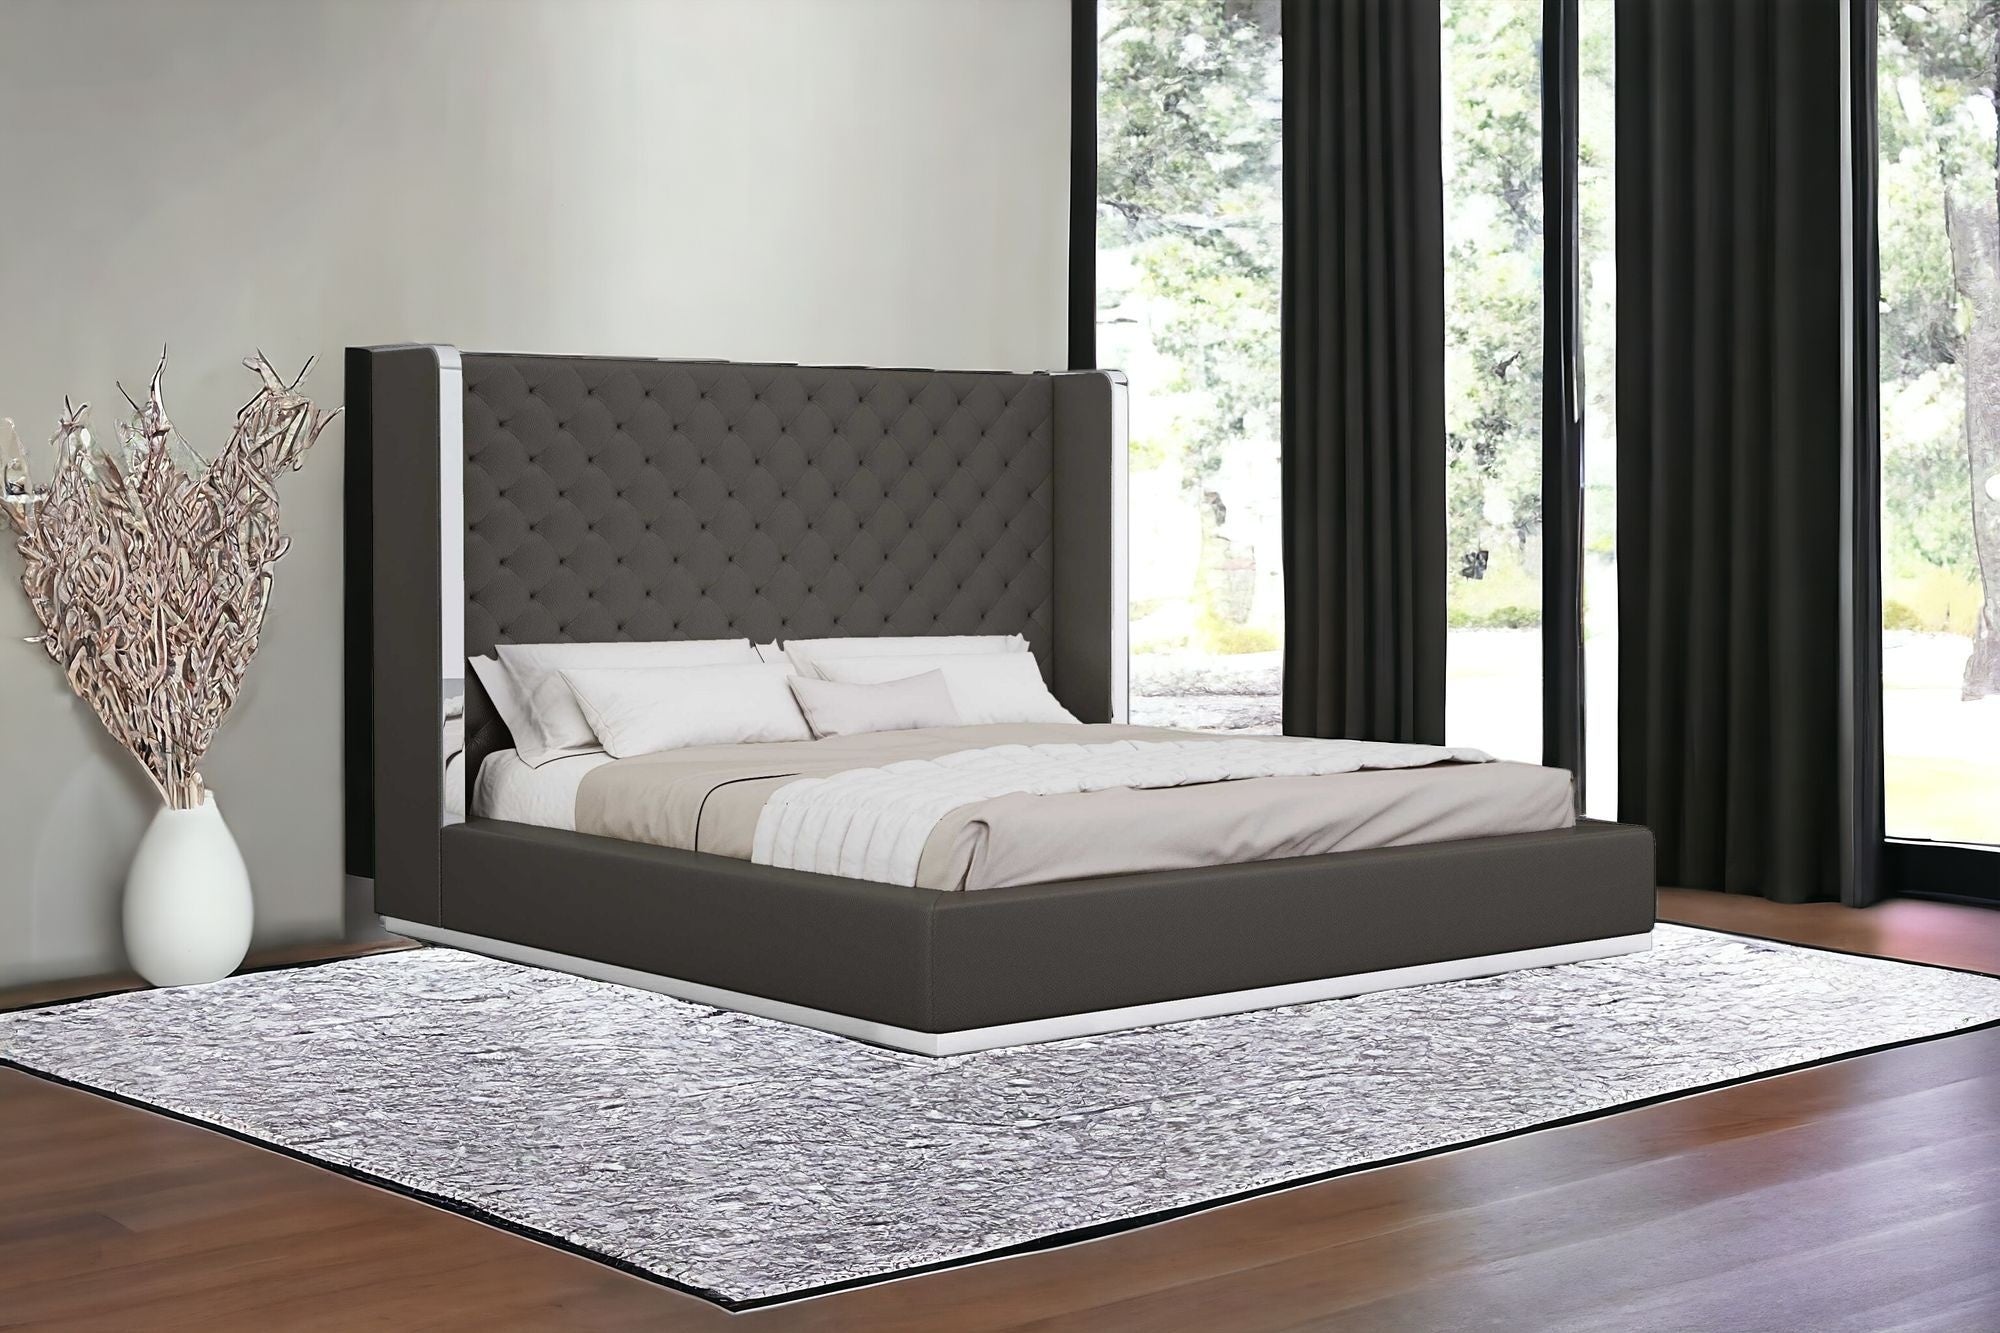 King Tufted Dark Gray And Gray Upholstered Faux Leather Bed